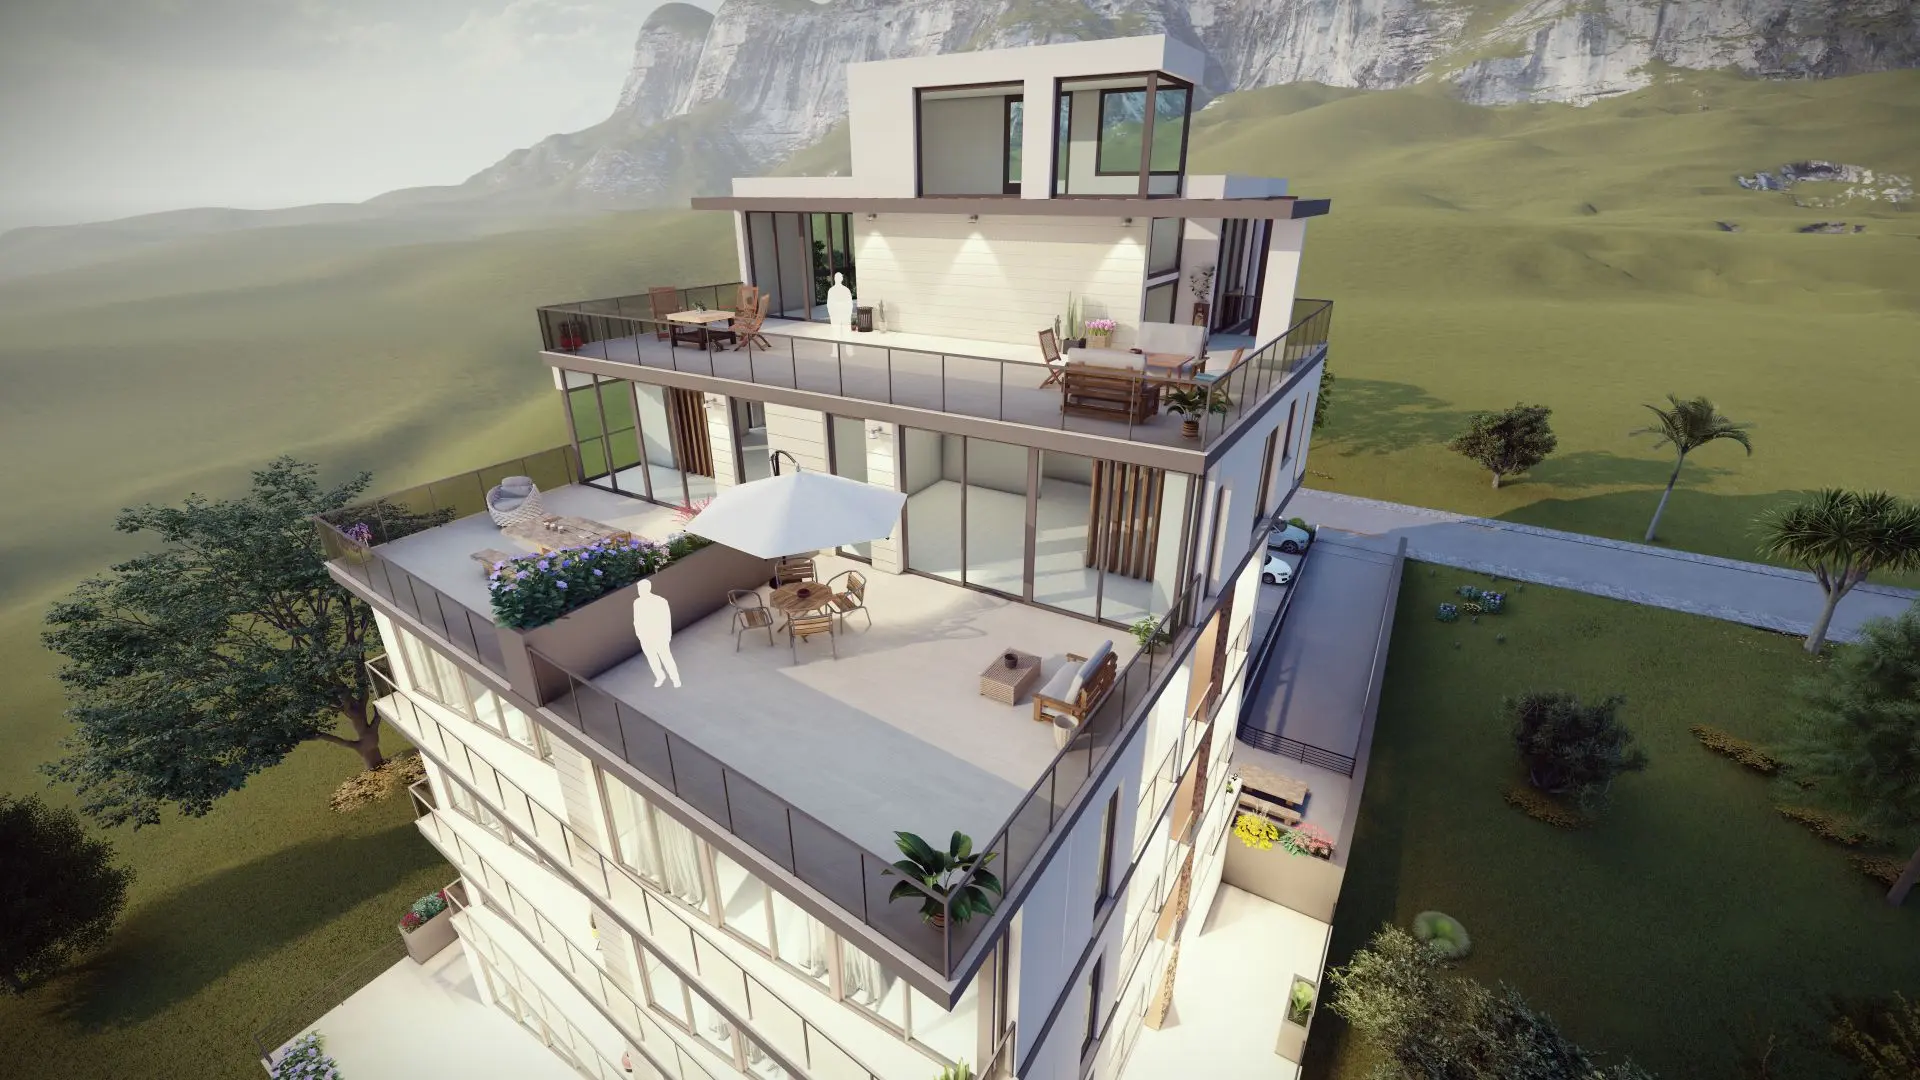 NEW PROJECT WITH MODERN DESIGN IN KYRENIA, CYPRUS